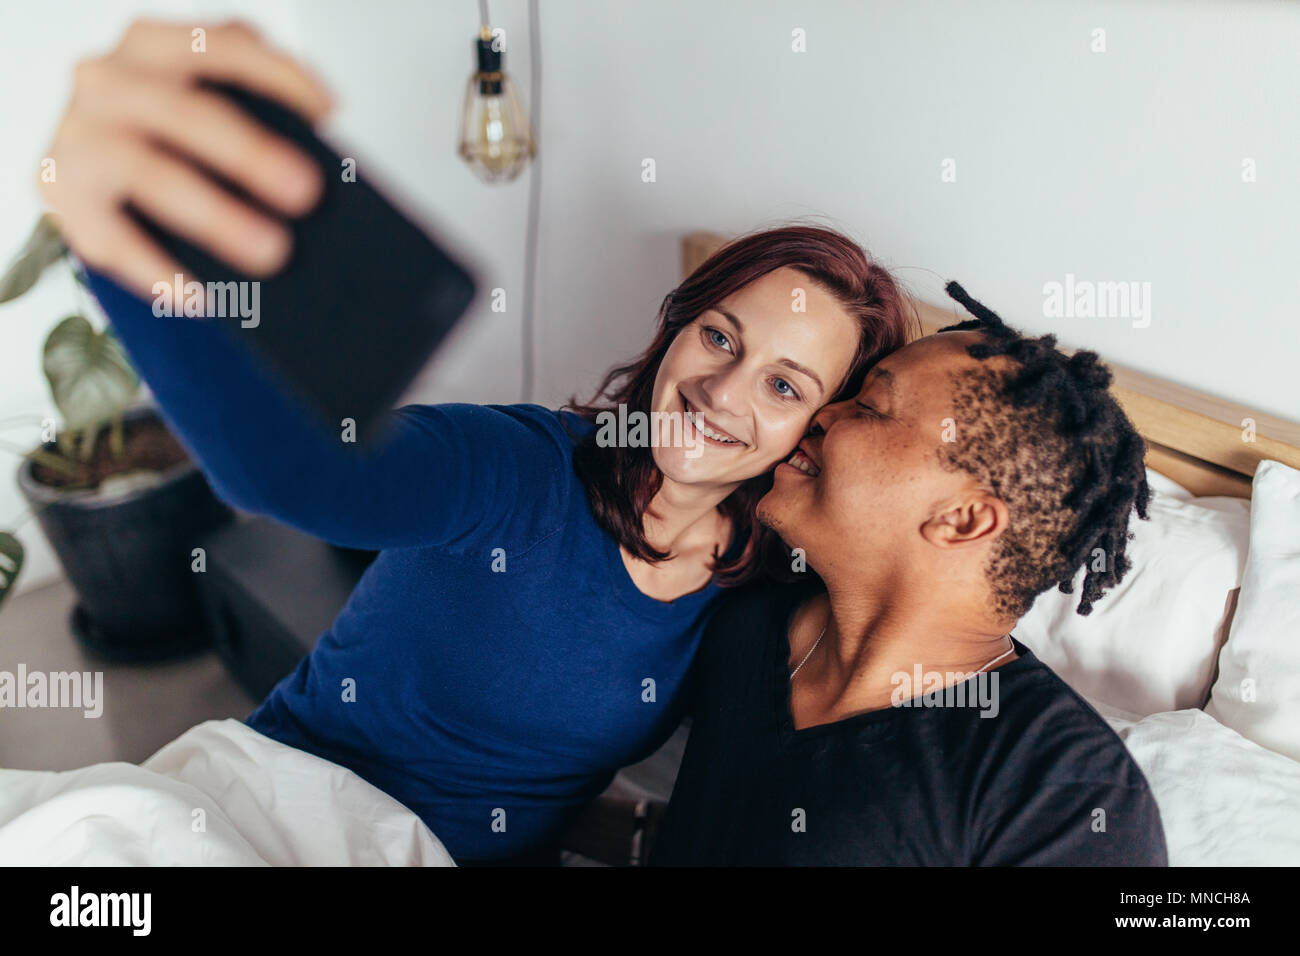 Romantic multiracial couple lying together on bed and taking selfie. Smiling man kissing on the cheek of woman taking selfie with mobile phone. Stock Photo